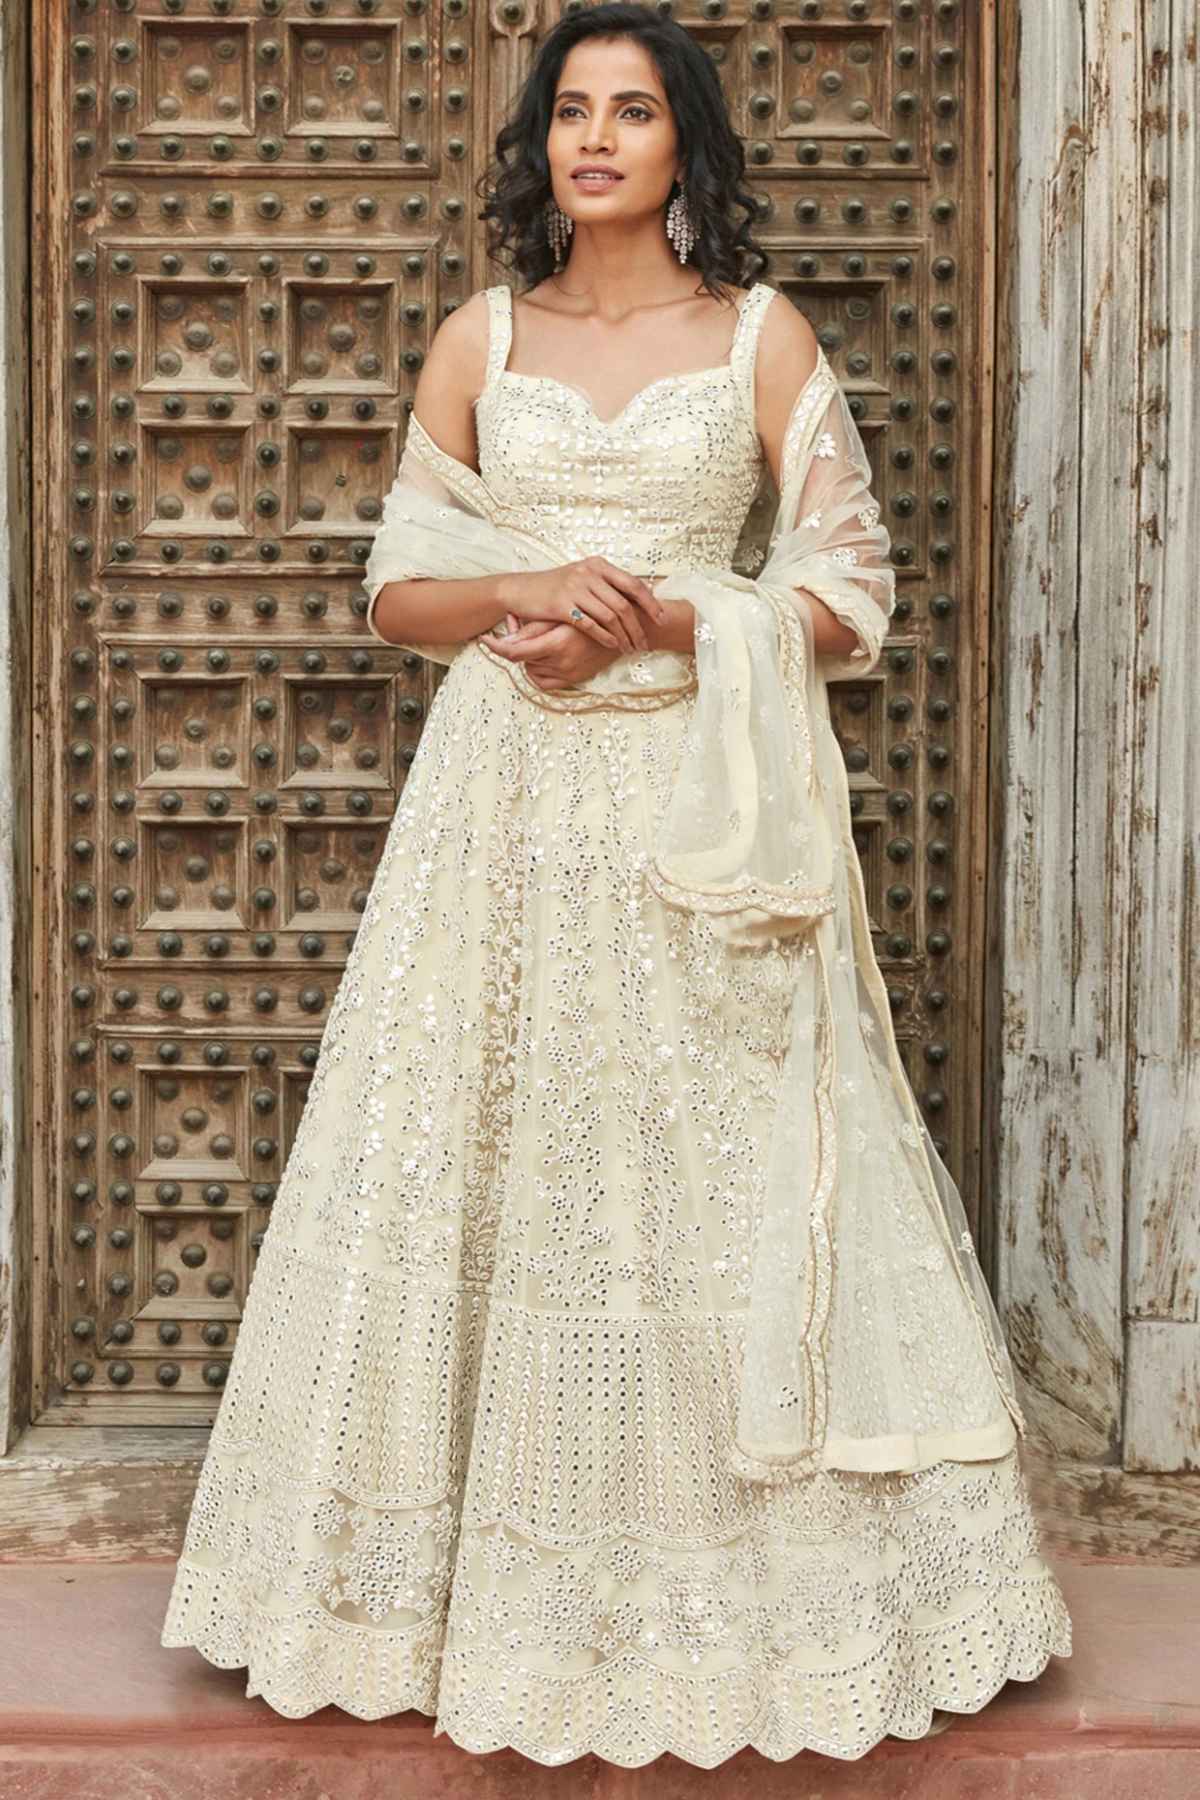 Where can we get beautiful Christian wedding gowns in Bangalore? - Quora